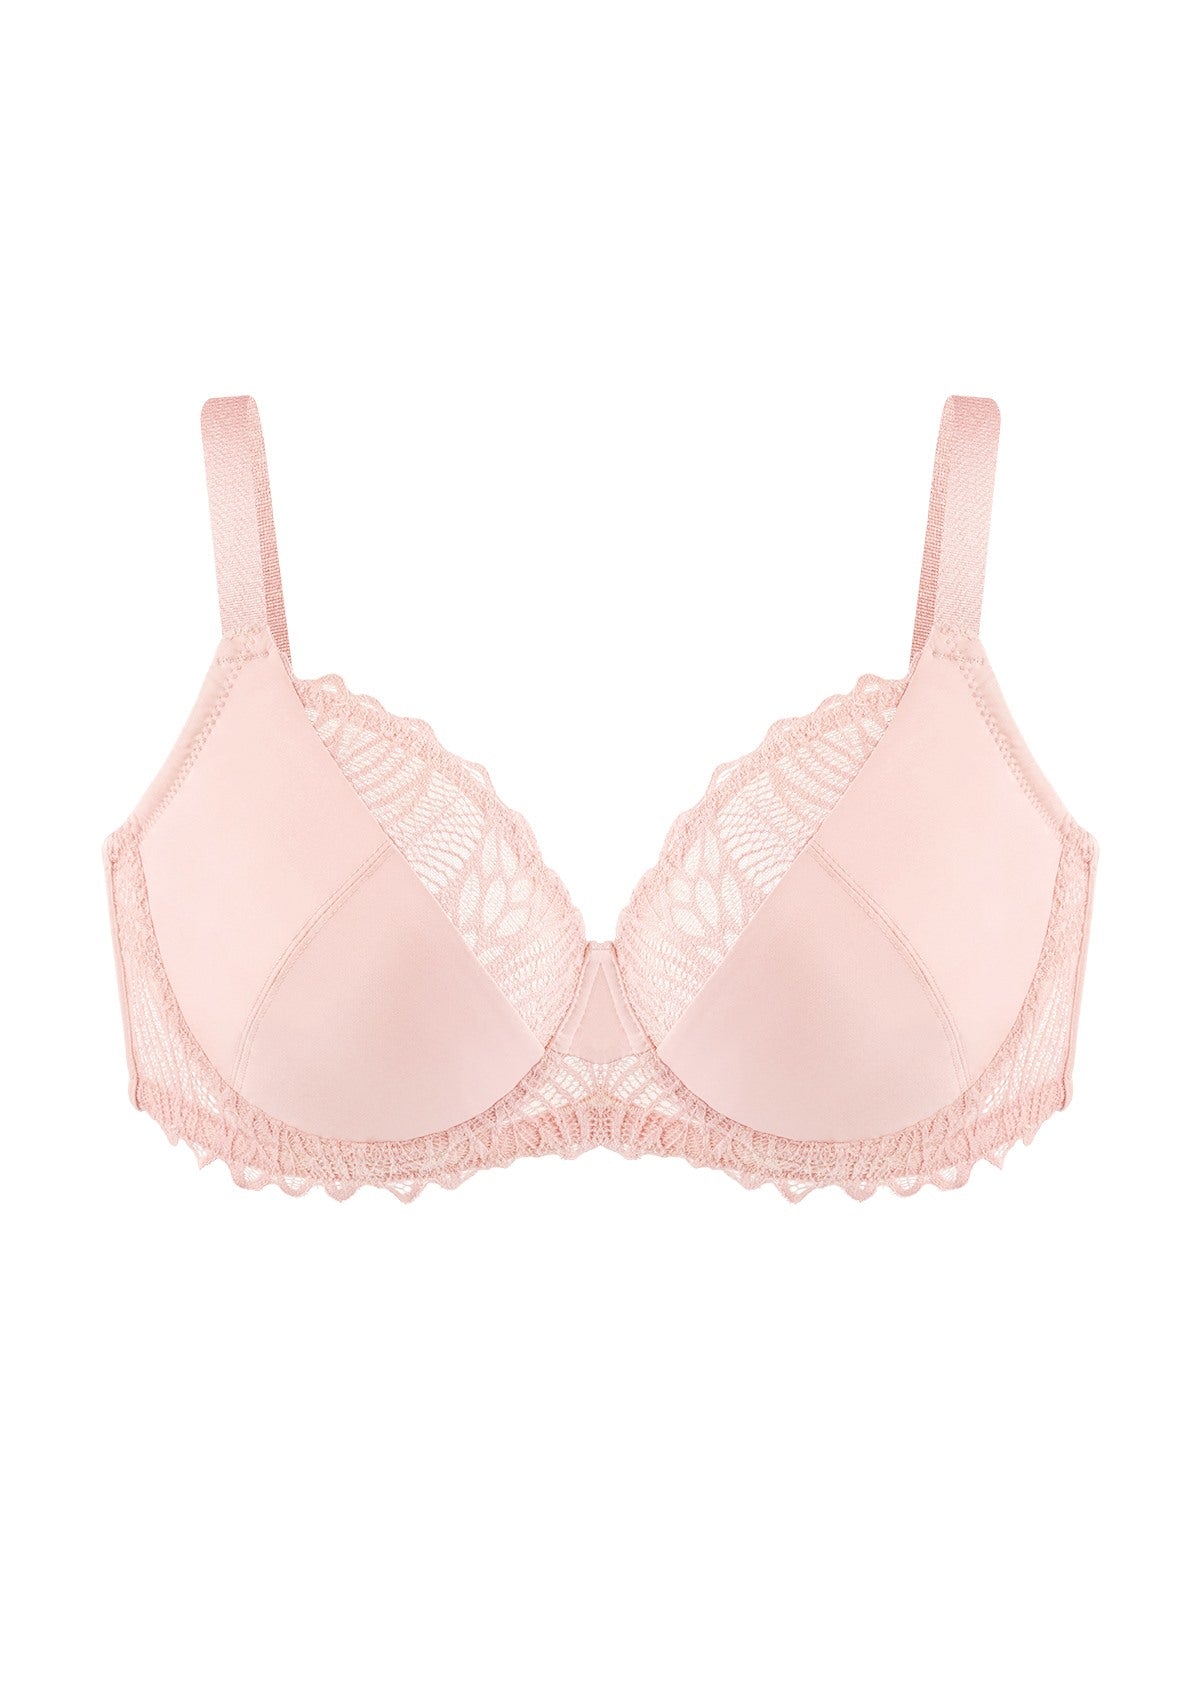 HSIA Pretty Secrets Lace-Trimmed Full Coverage Underwire Bra For Support - Light Pink / 38 / D